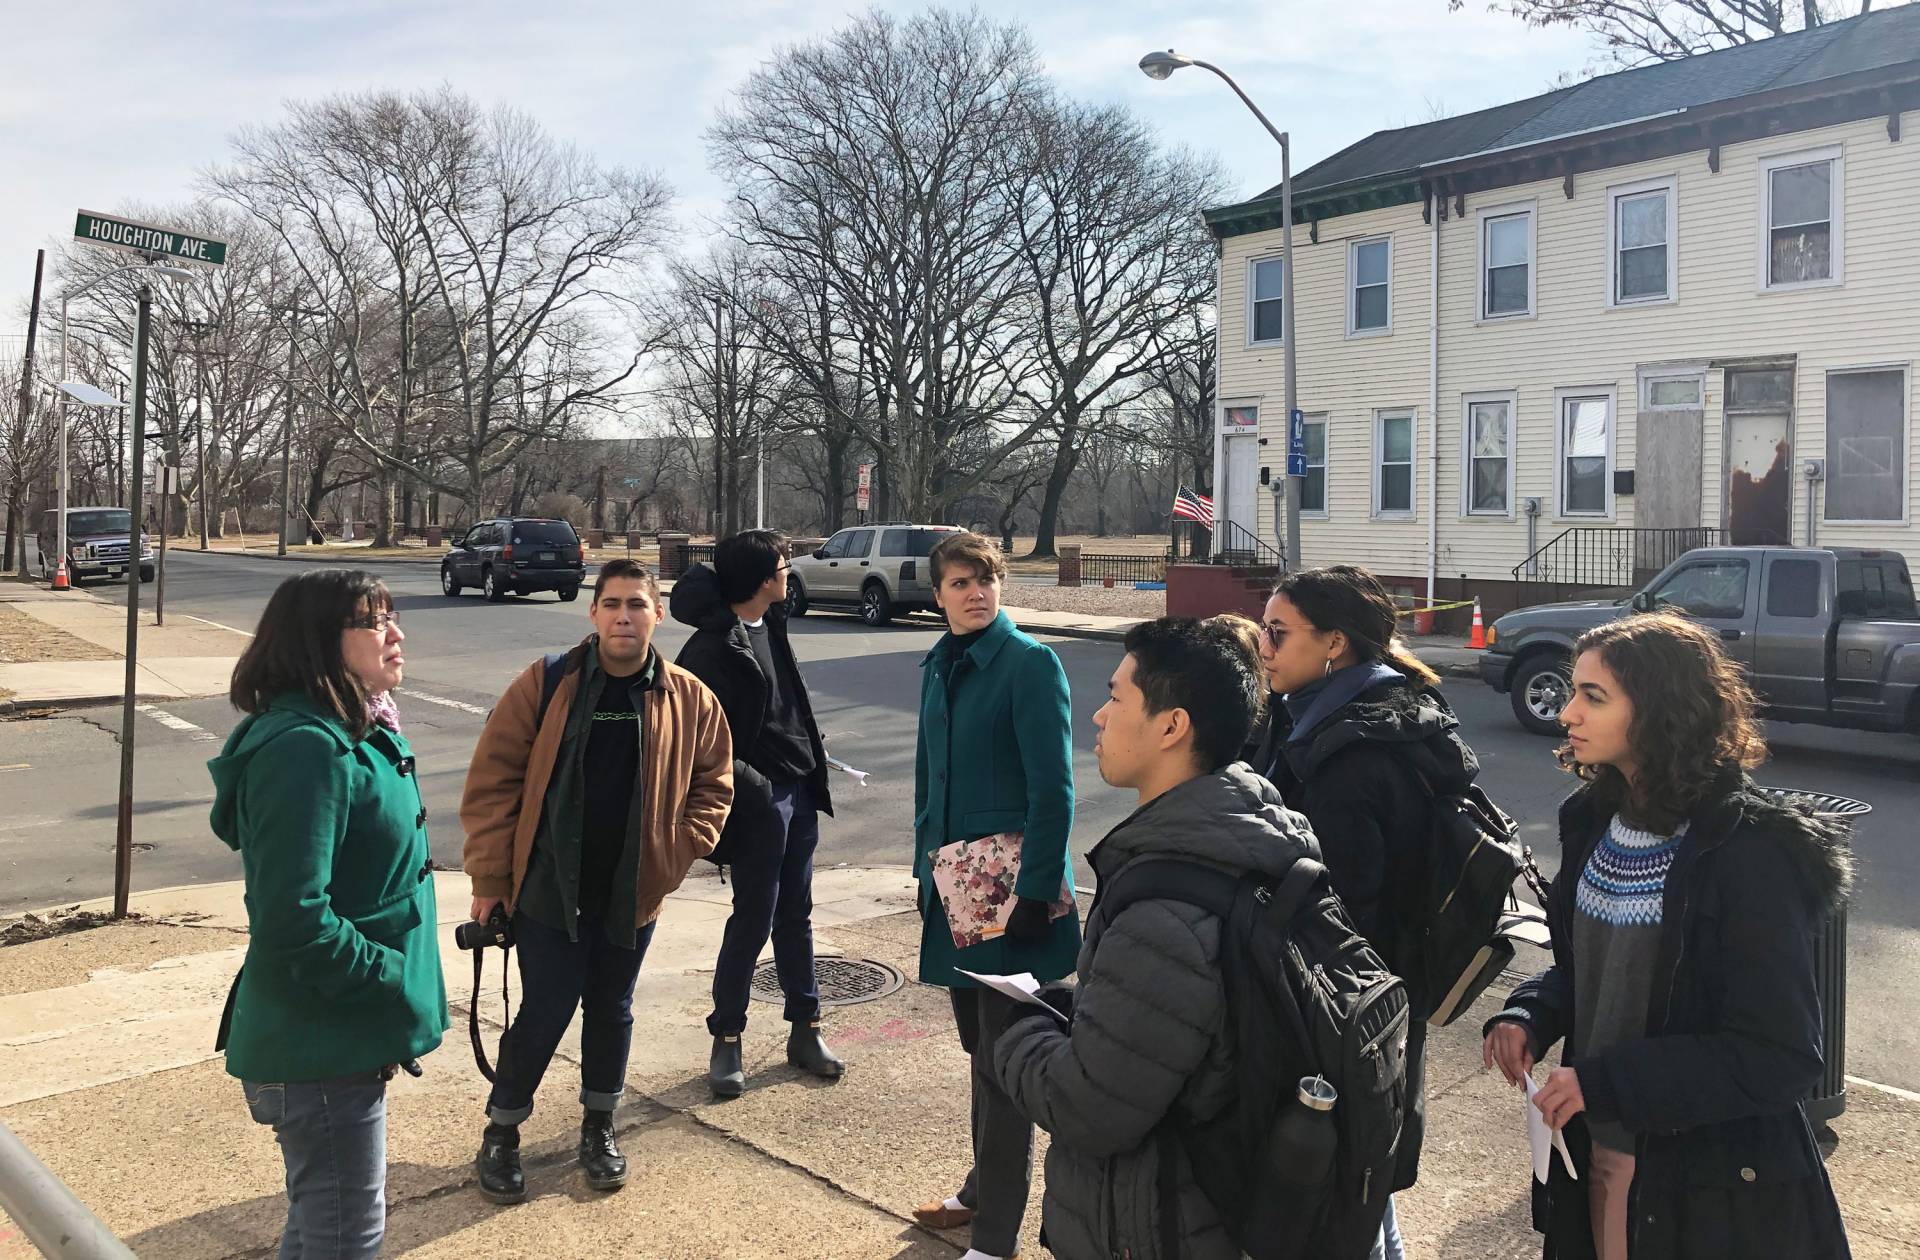 Students on a walking tour in Trenton